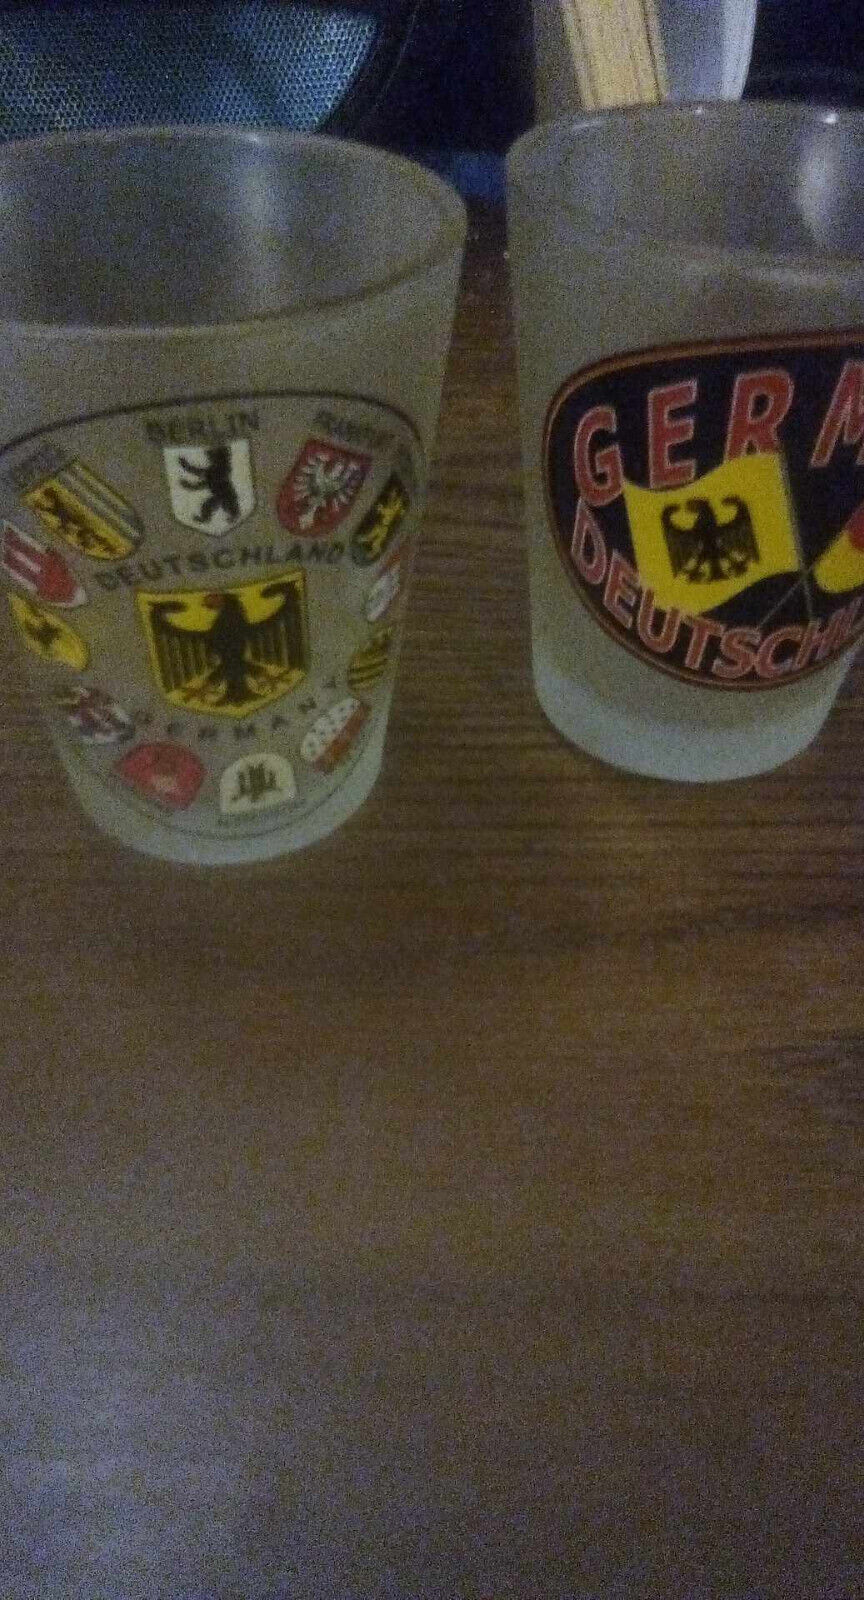 LOT-2 Deutschland Germany Shot Glasses - Very Nice - Great Condition